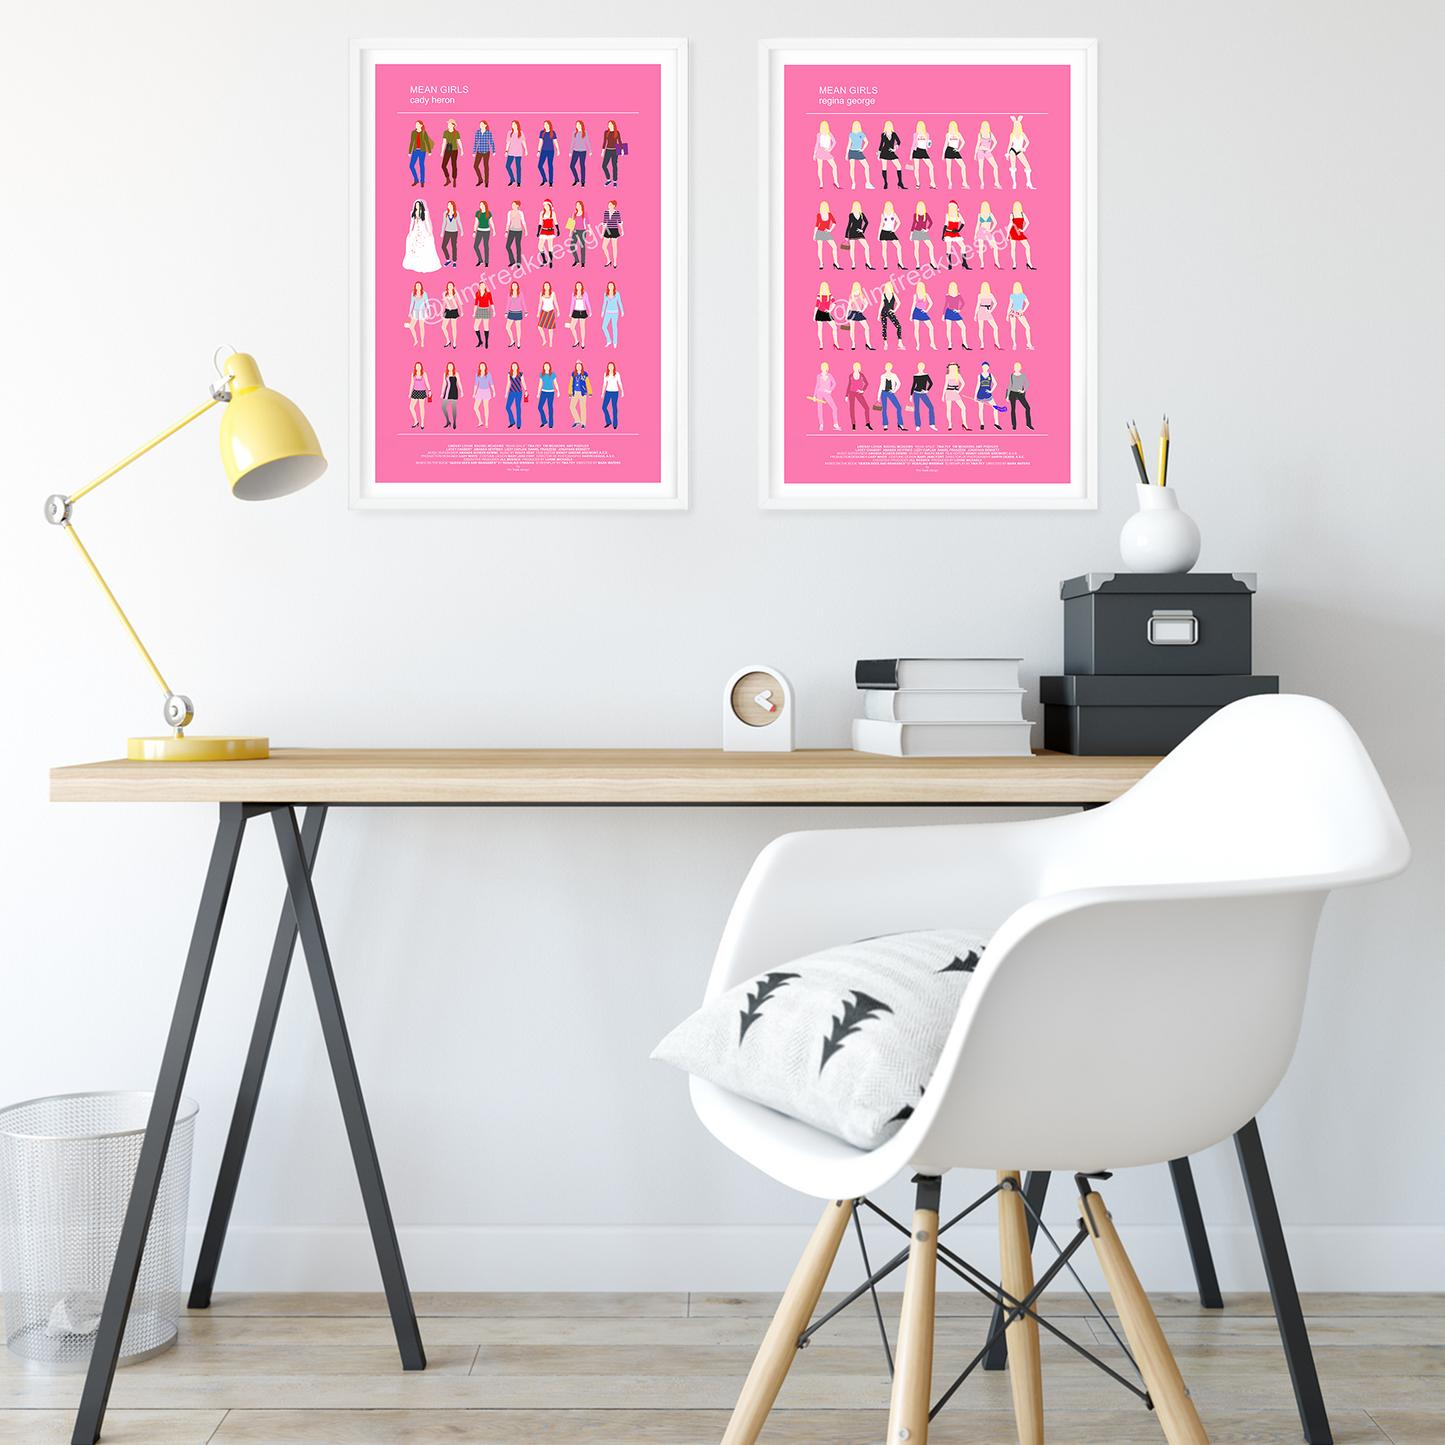 Mean Girls set of 2 posters - Regina George and Cady Heron